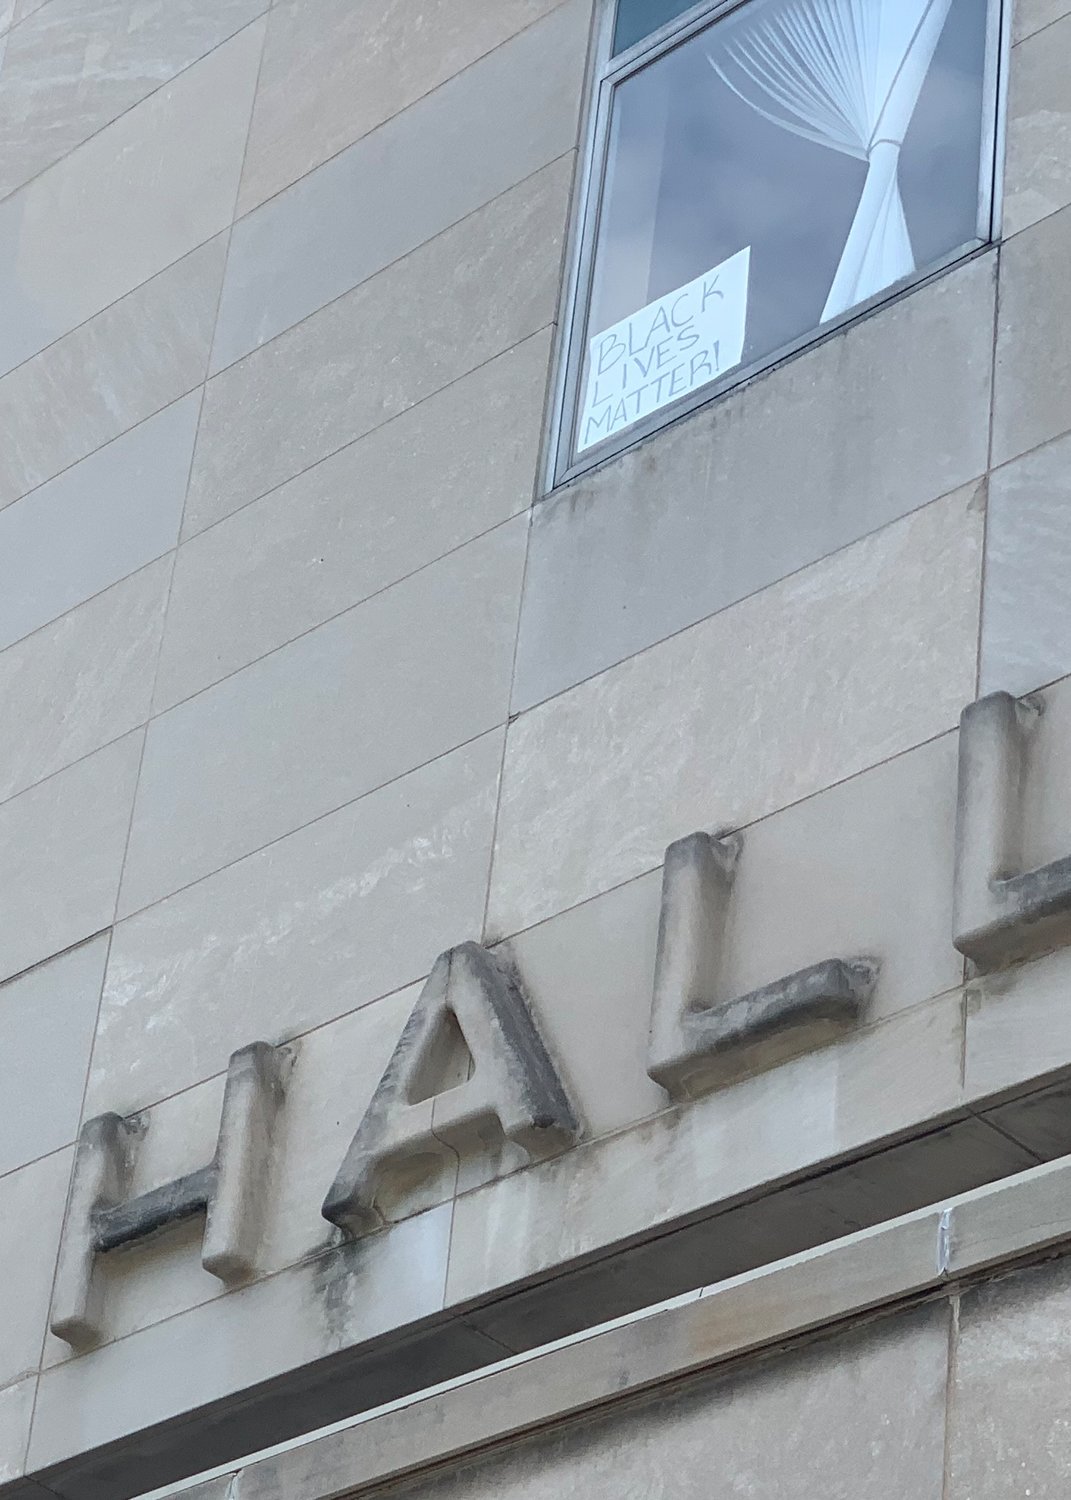 A "Black Lives Matter" sign in a window at City Hall.